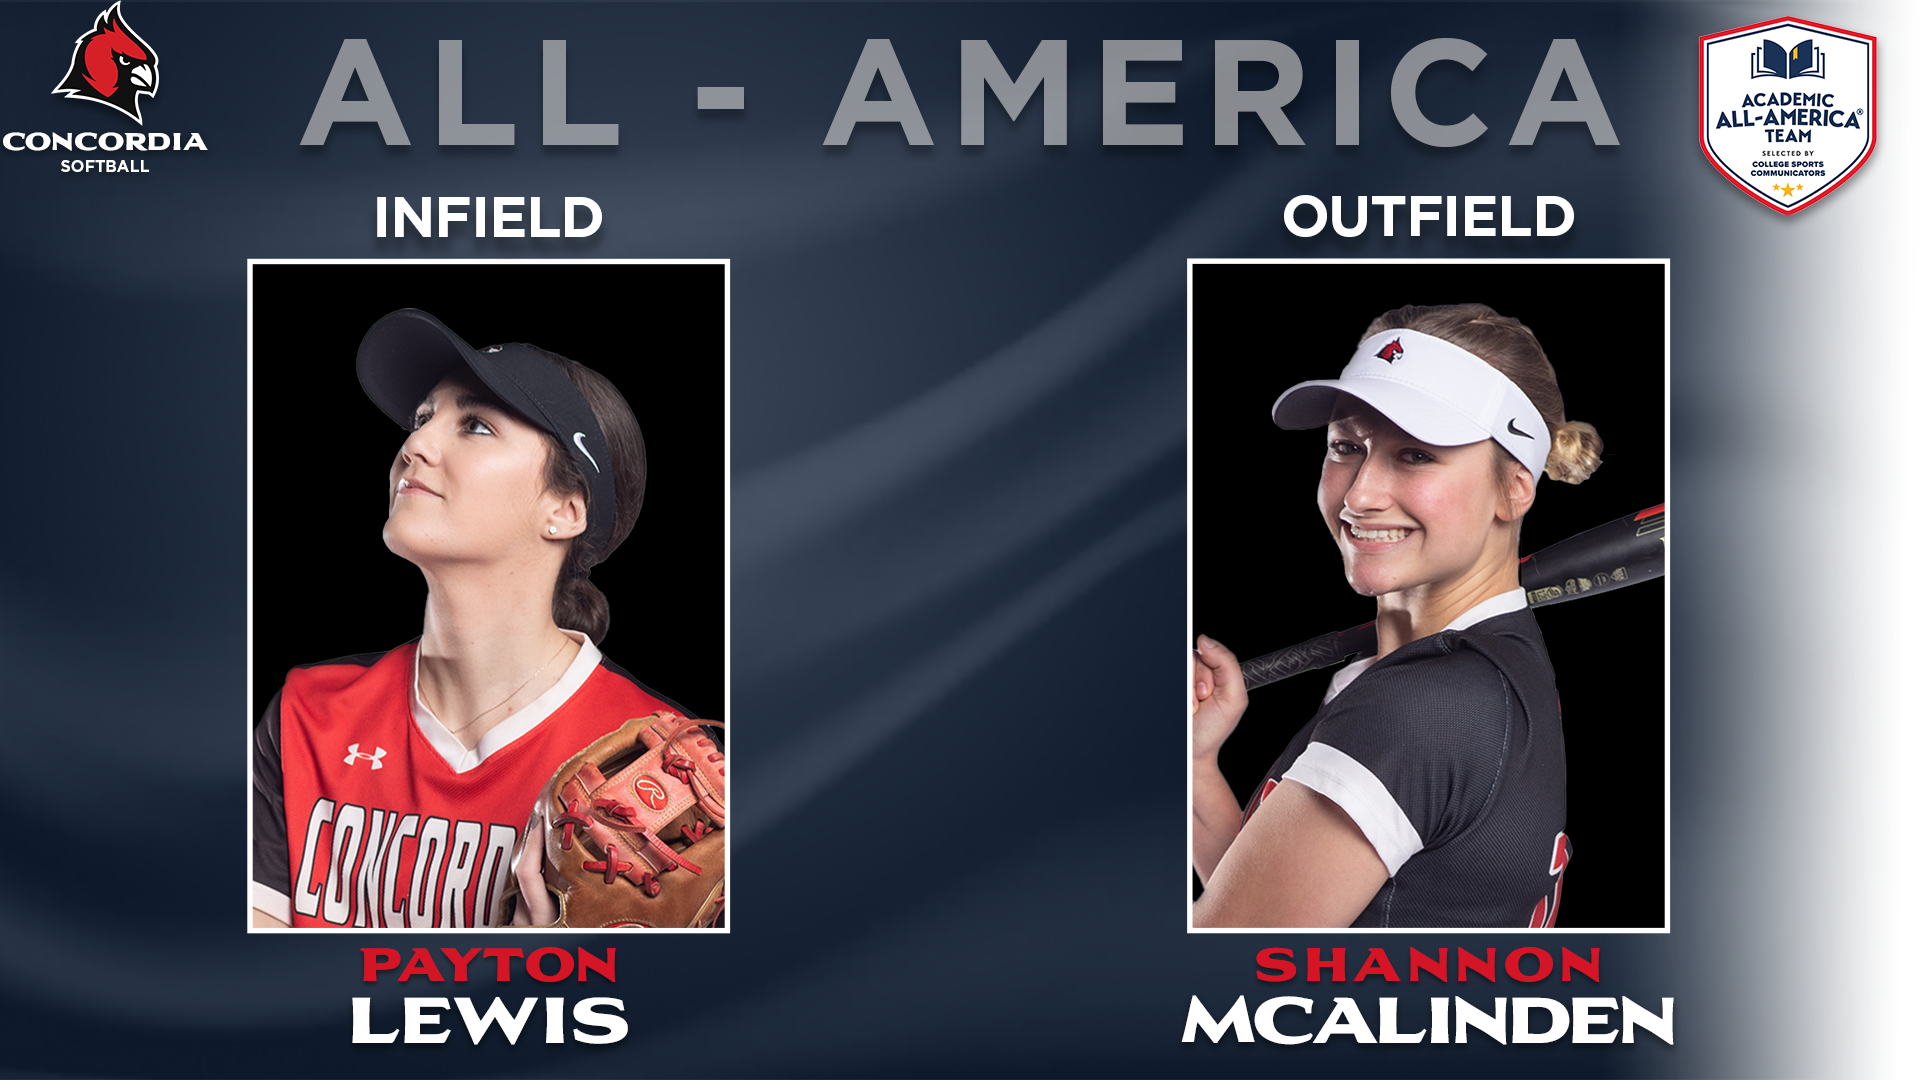 CSC names Lewis and McAlinden to All-America teams